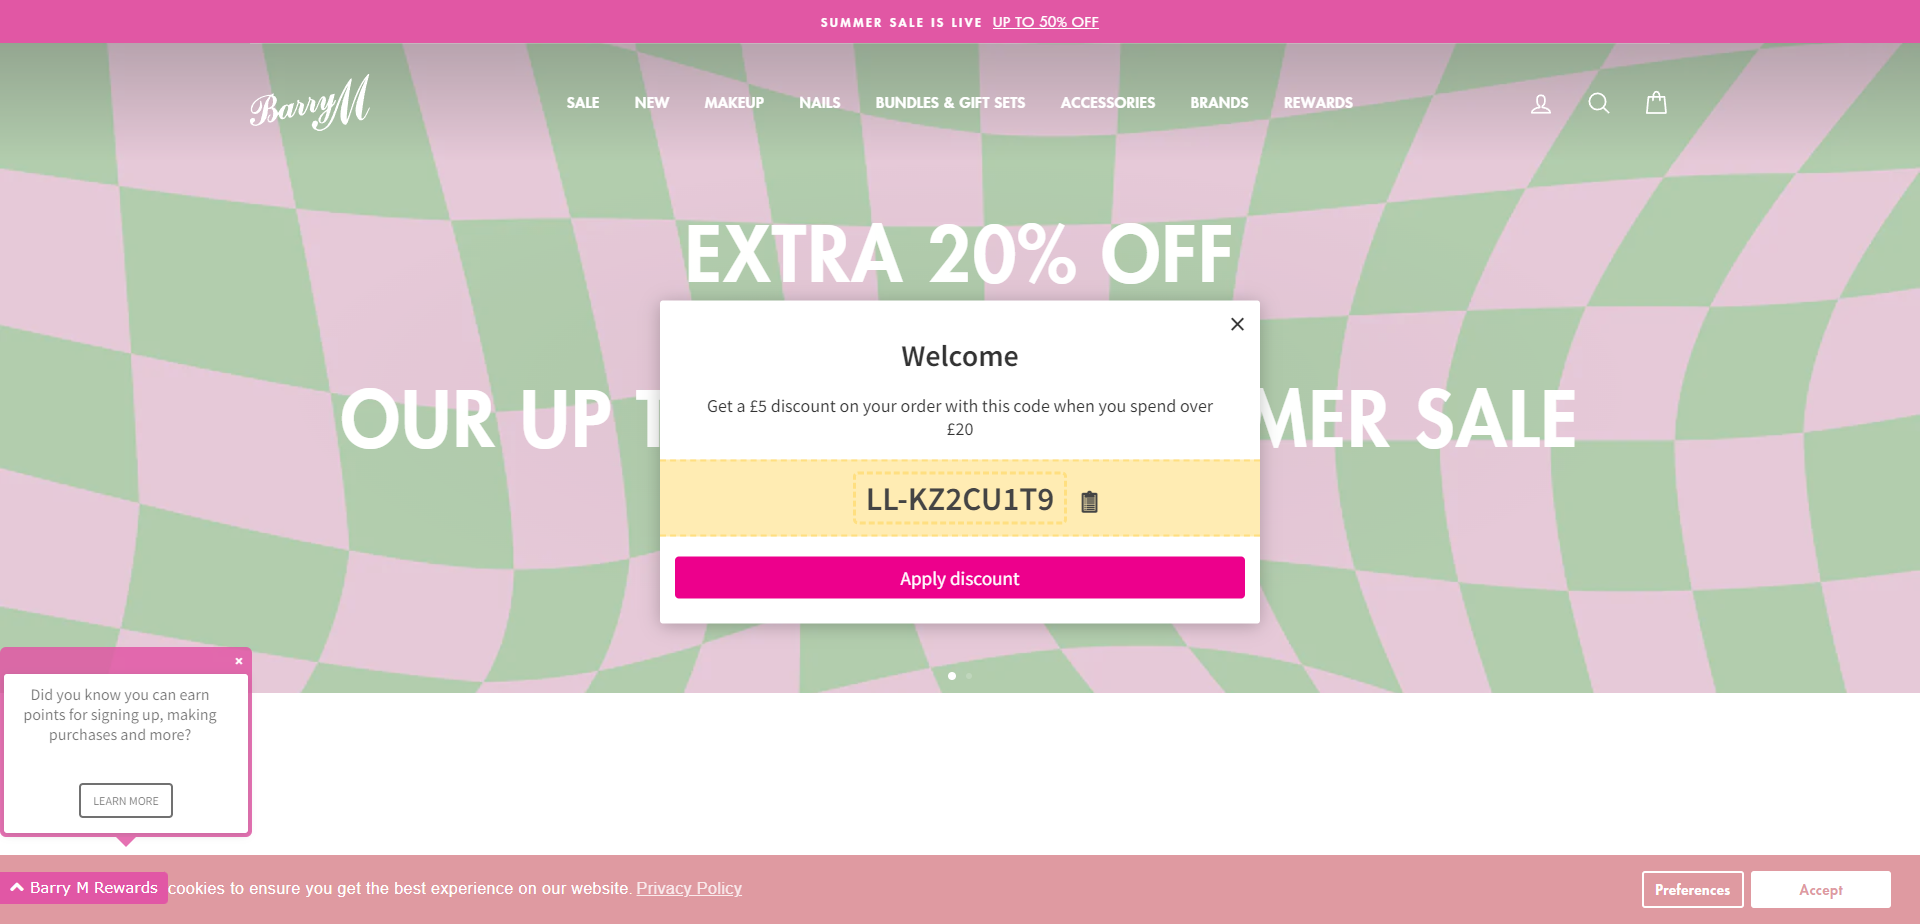 Referral Landing Page for Barry M Cosmetics